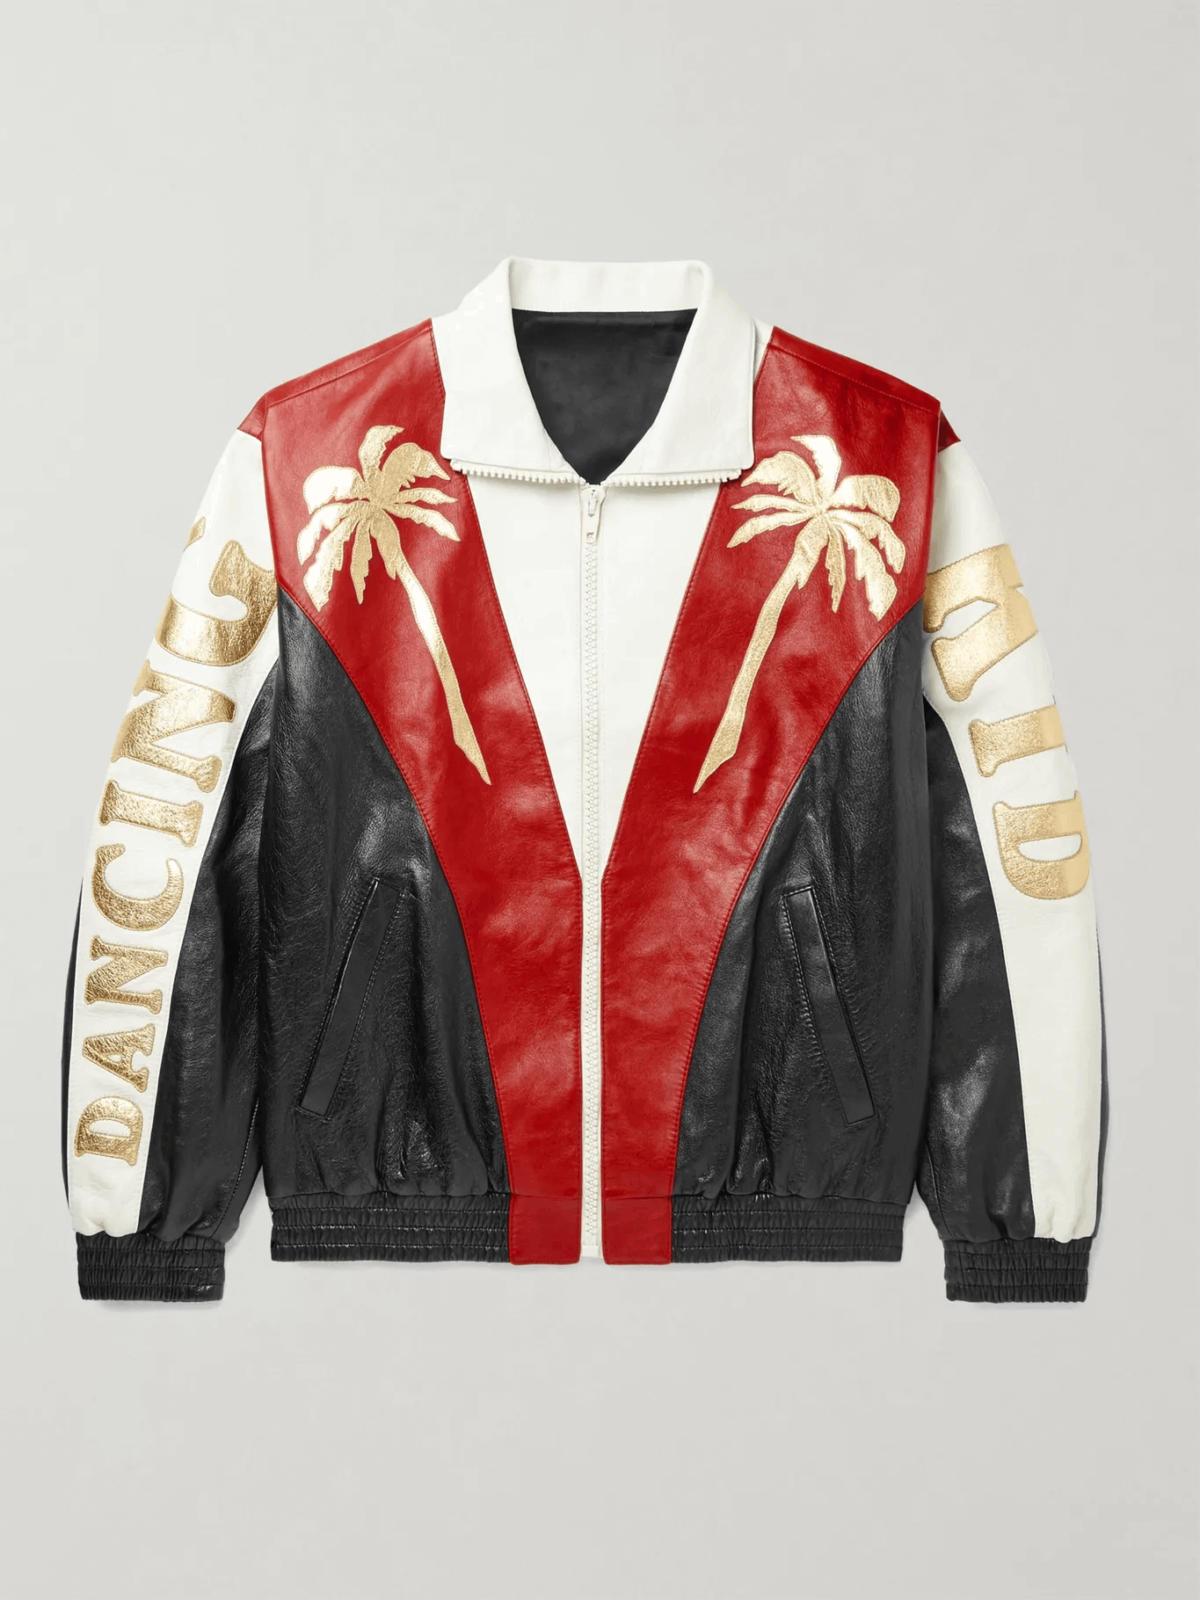 Red, white, black, and palm tree leather jacket worn by G-Eazy - front